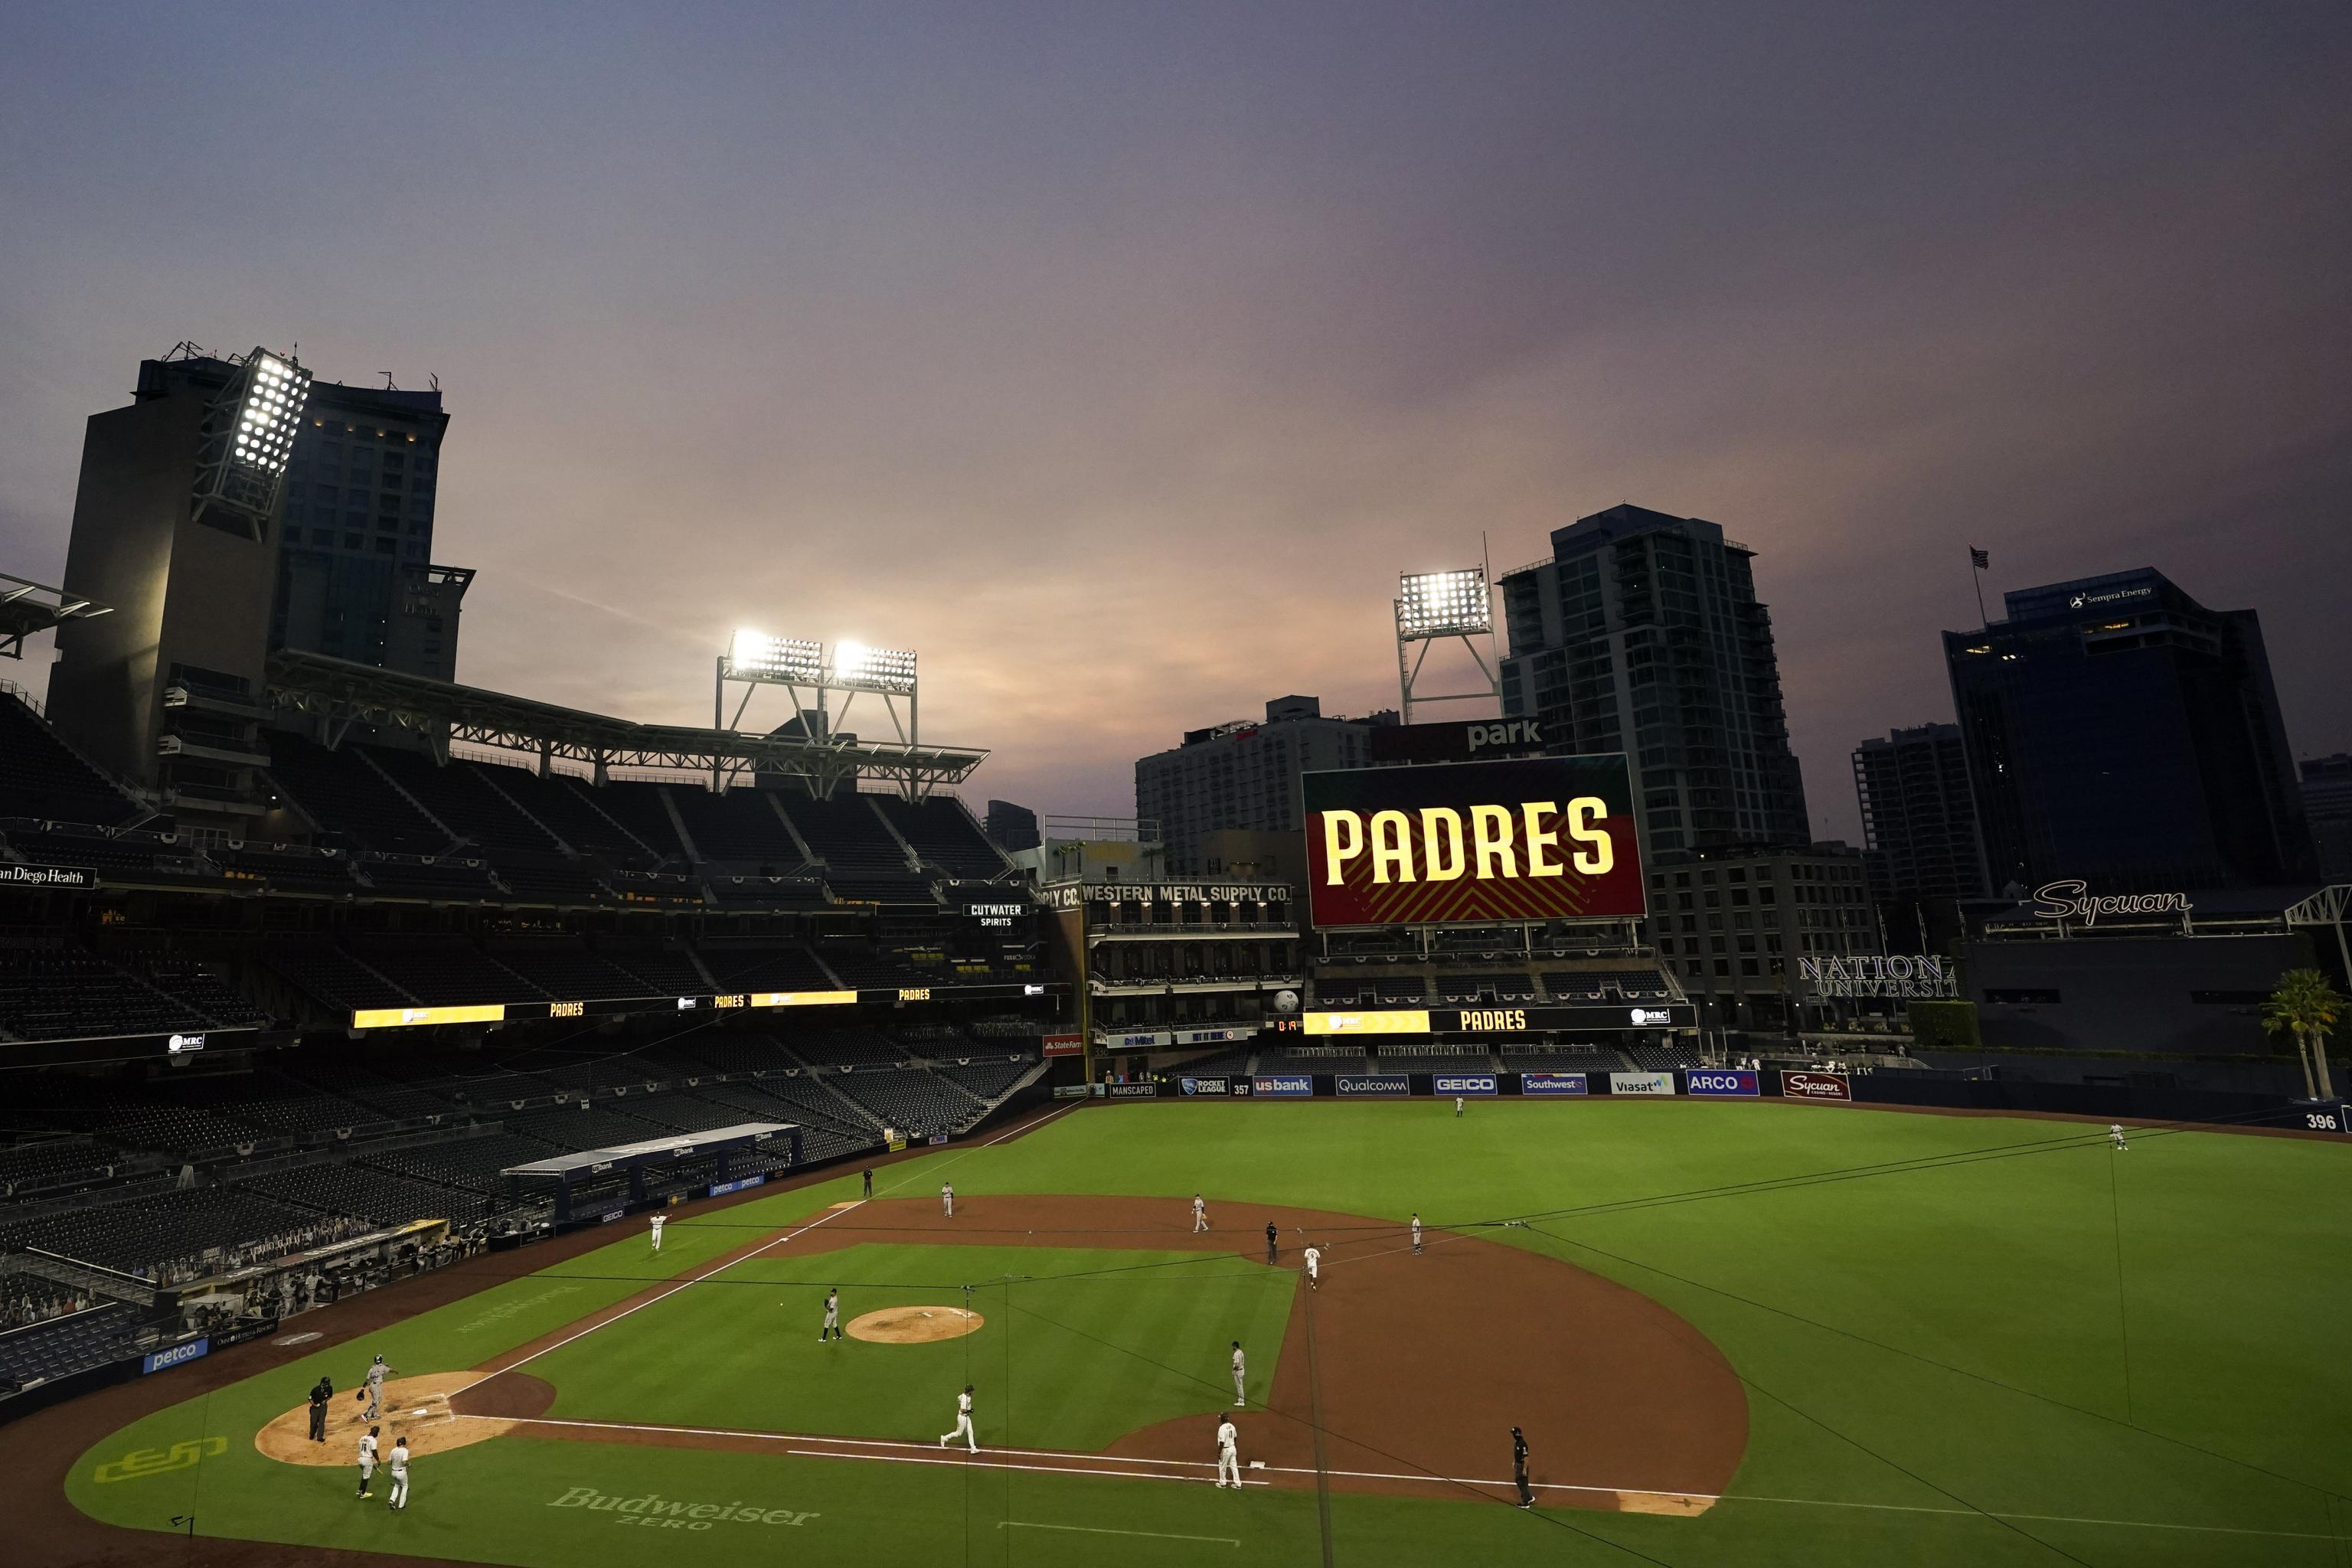 San Diego Padres - Saturday night in CO.